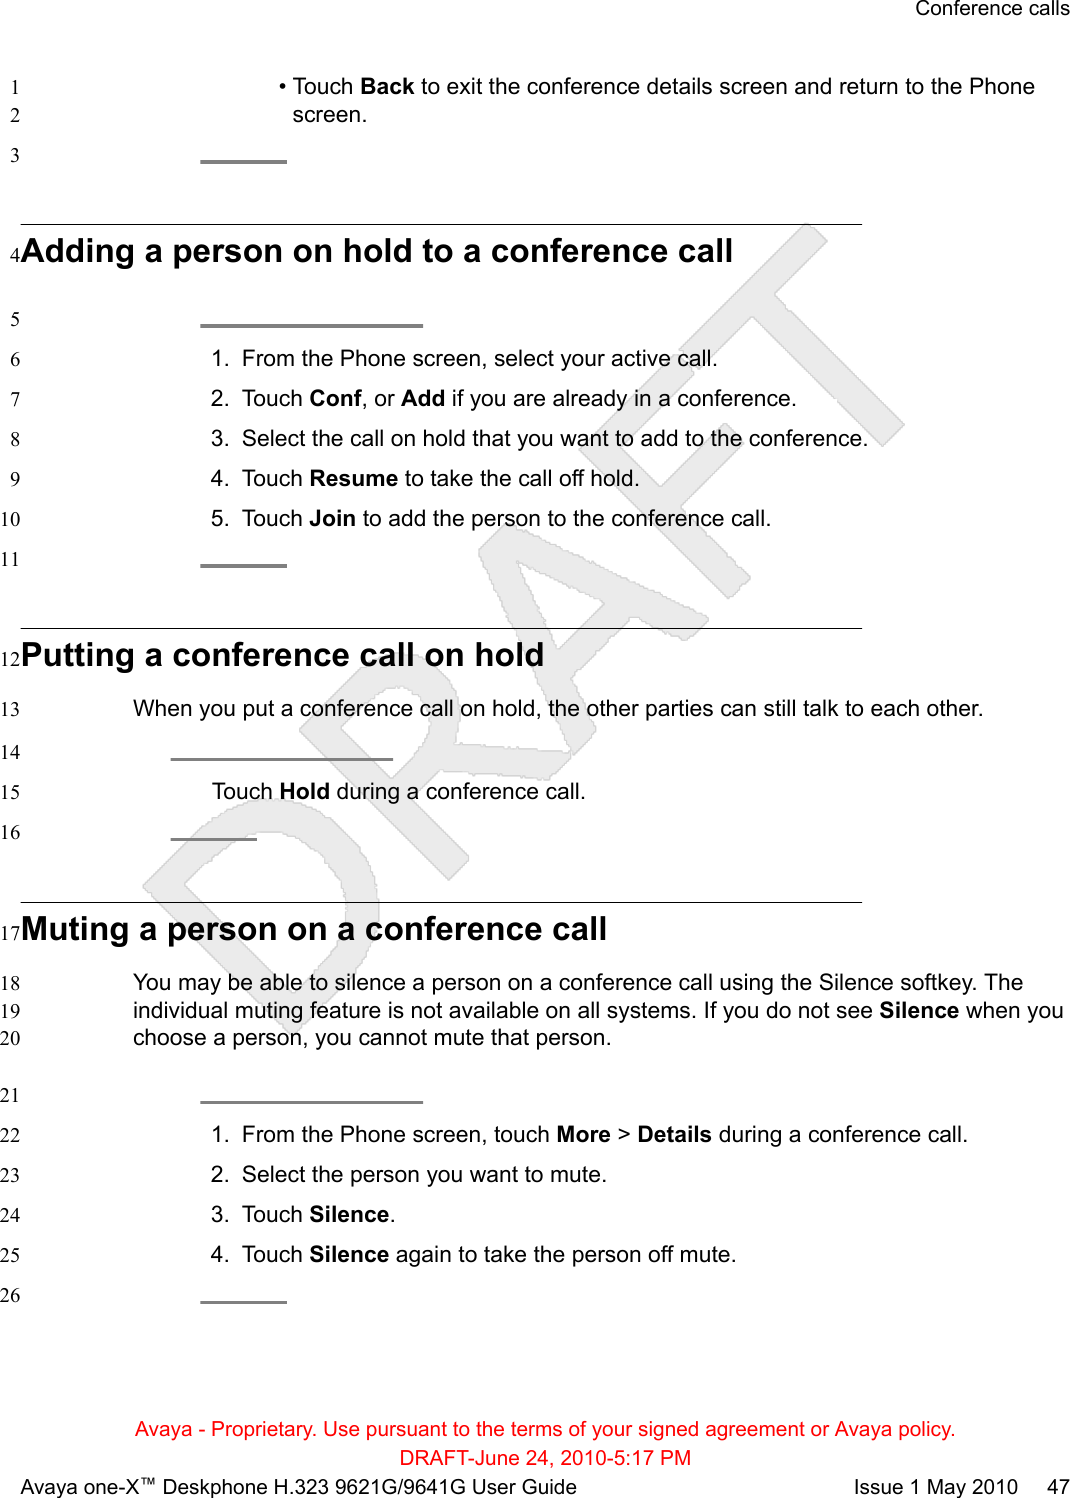 • Touch Back to exit the conference details screen and return to the Phone1screen.23Adding a person on hold to a conference call451. From the Phone screen, select your active call.62. Touch Conf, or Add if you are already in a conference.73. Select the call on hold that you want to add to the conference.84. Touch Resume to take the call off hold.95. Touch Join to add the person to the conference call.1011Putting a conference call on hold12When you put a conference call on hold, the other parties can still talk to each other.1314Touch Hold during a conference call.1516Muting a person on a conference call17You may be able to silence a person on a conference call using the Silence softkey. The18individual muting feature is not available on all systems. If you do not see Silence when you19choose a person, you cannot mute that person.20211. From the Phone screen, touch More &gt; Details during a conference call.222. Select the person you want to mute.233. Touch Silence.244. Touch Silence again to take the person off mute.2526Conference callsAvaya - Proprietary. Use pursuant to the terms of your signed agreement or Avaya policy.DRAFT-June 24, 2010-5:17 PMAvaya one-X™ Deskphone H.323 9621G/9641G User Guide Issue 1 May 2010     47